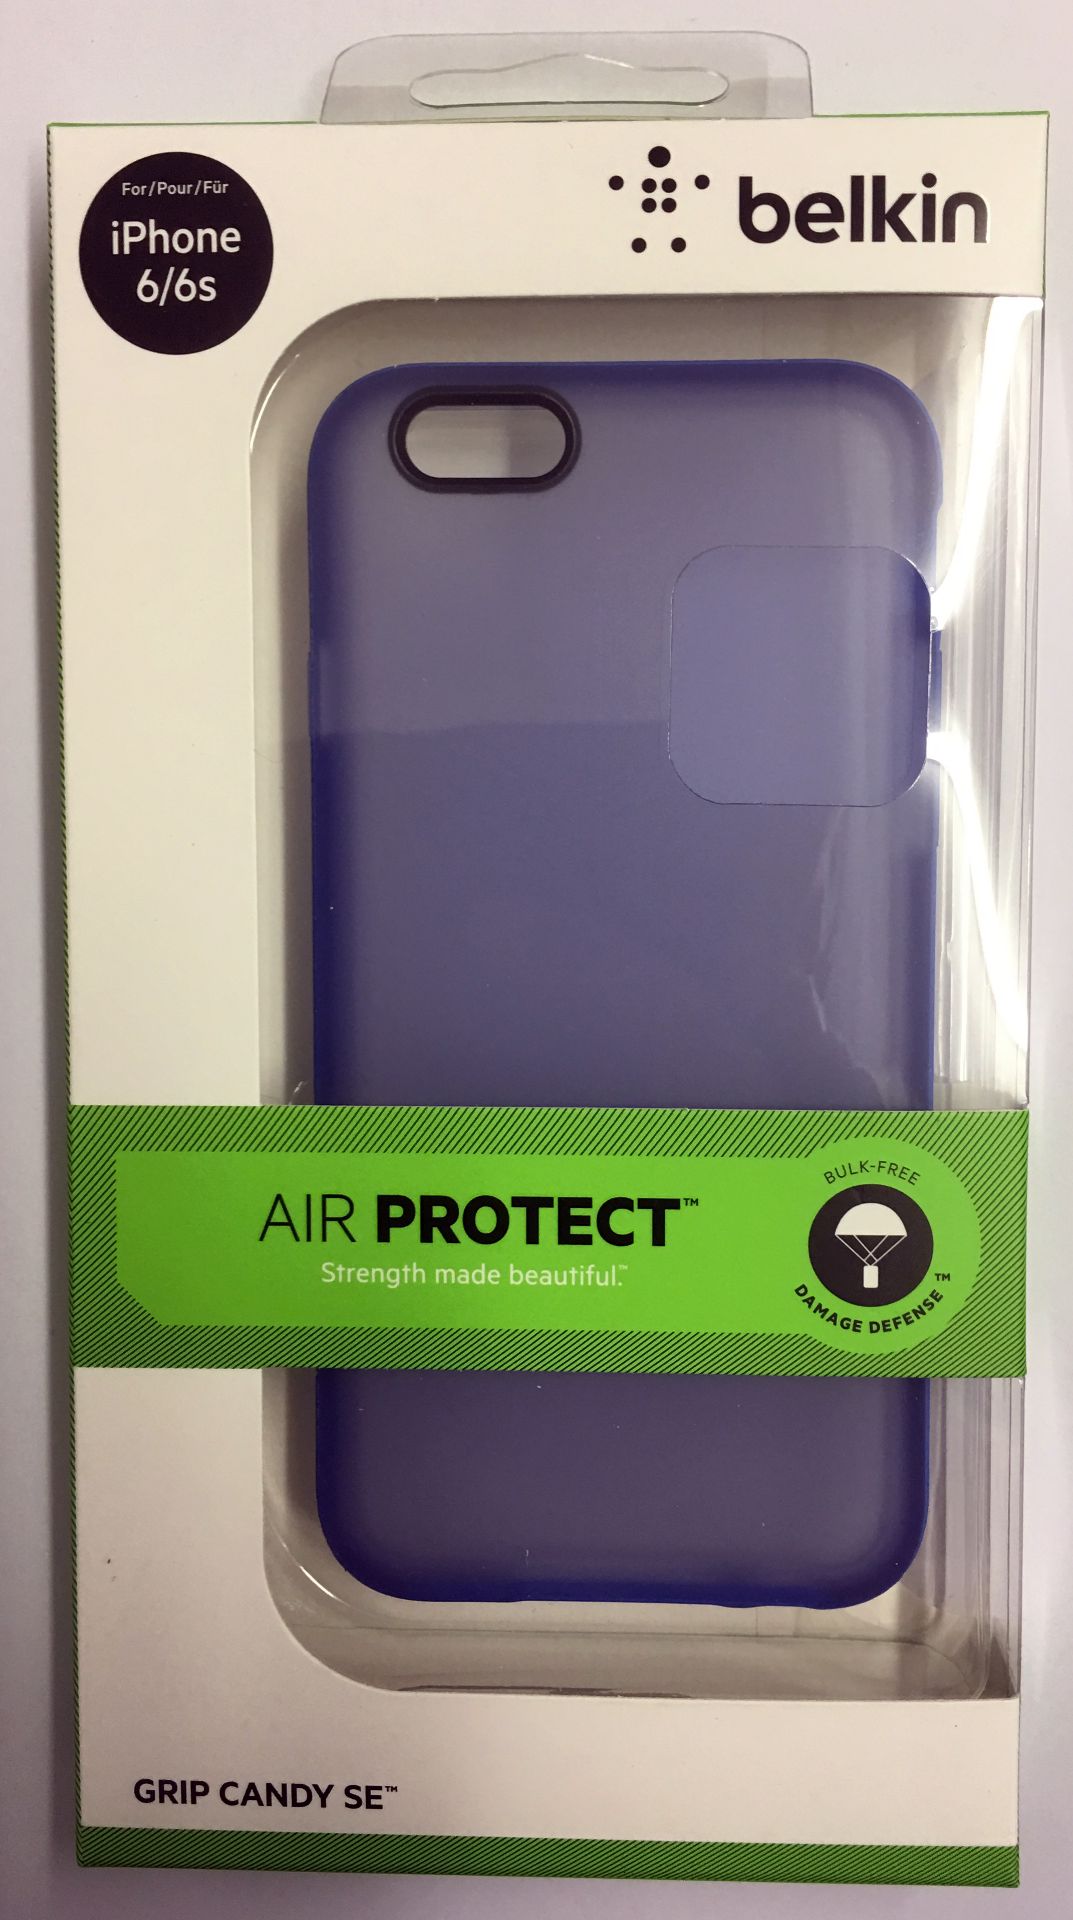 Lot of 40 Units-Belkin iPhone 6 Tectured Grip Slim Case - F8W502btC06 - Translucent / Blue - Image 2 of 4